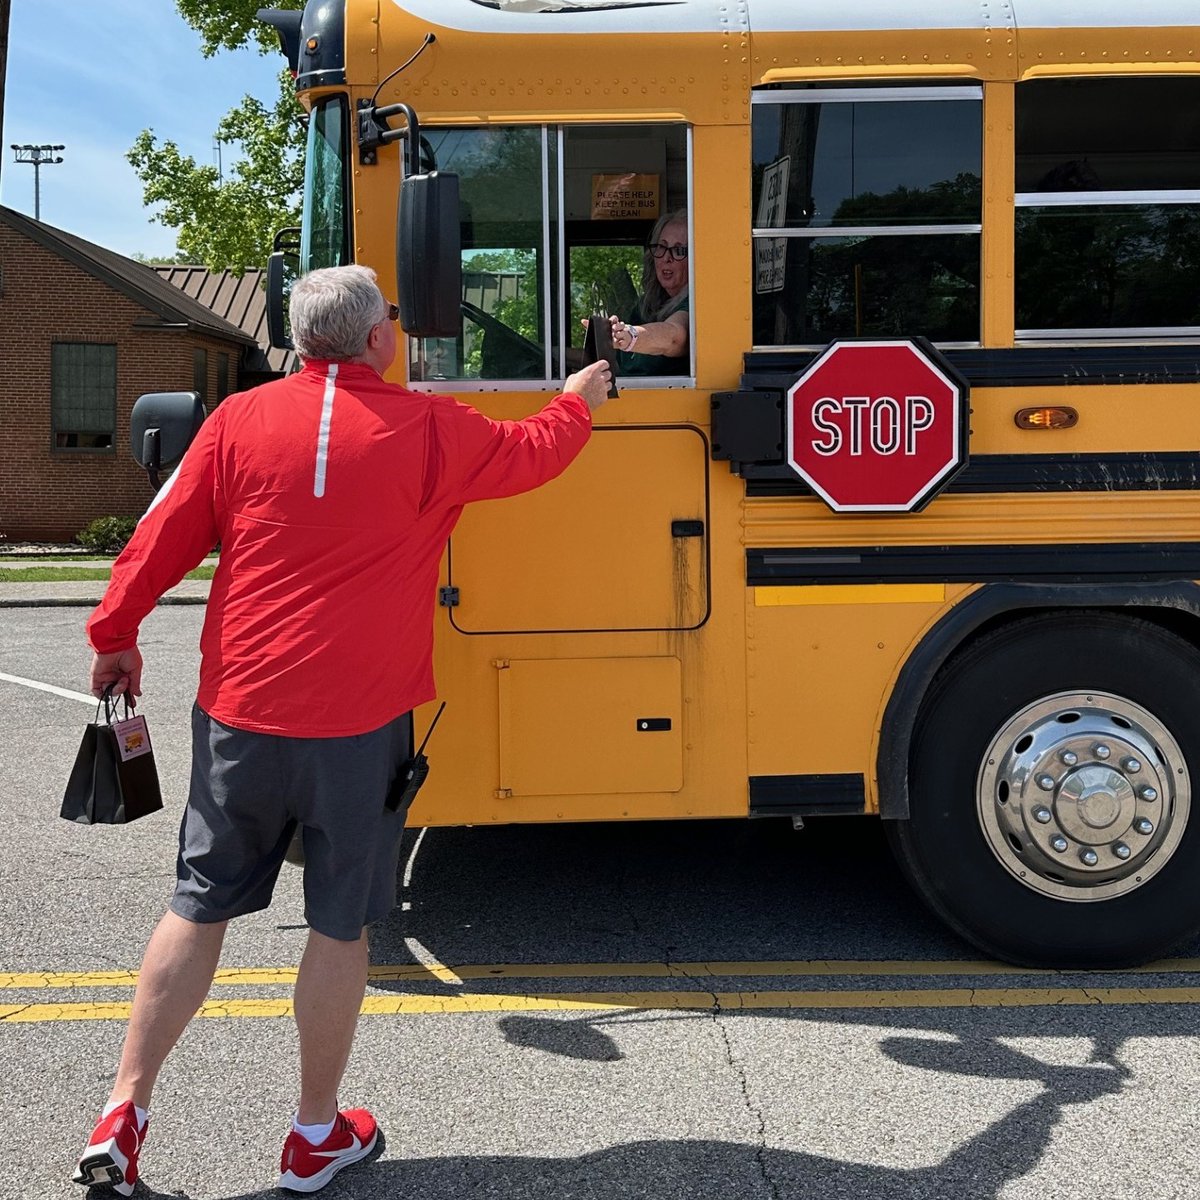 It's School Bus Driver Appreciation Day! Thank you to our bus drivers and assistants who transport MCS students safely each day! #wearemaryville